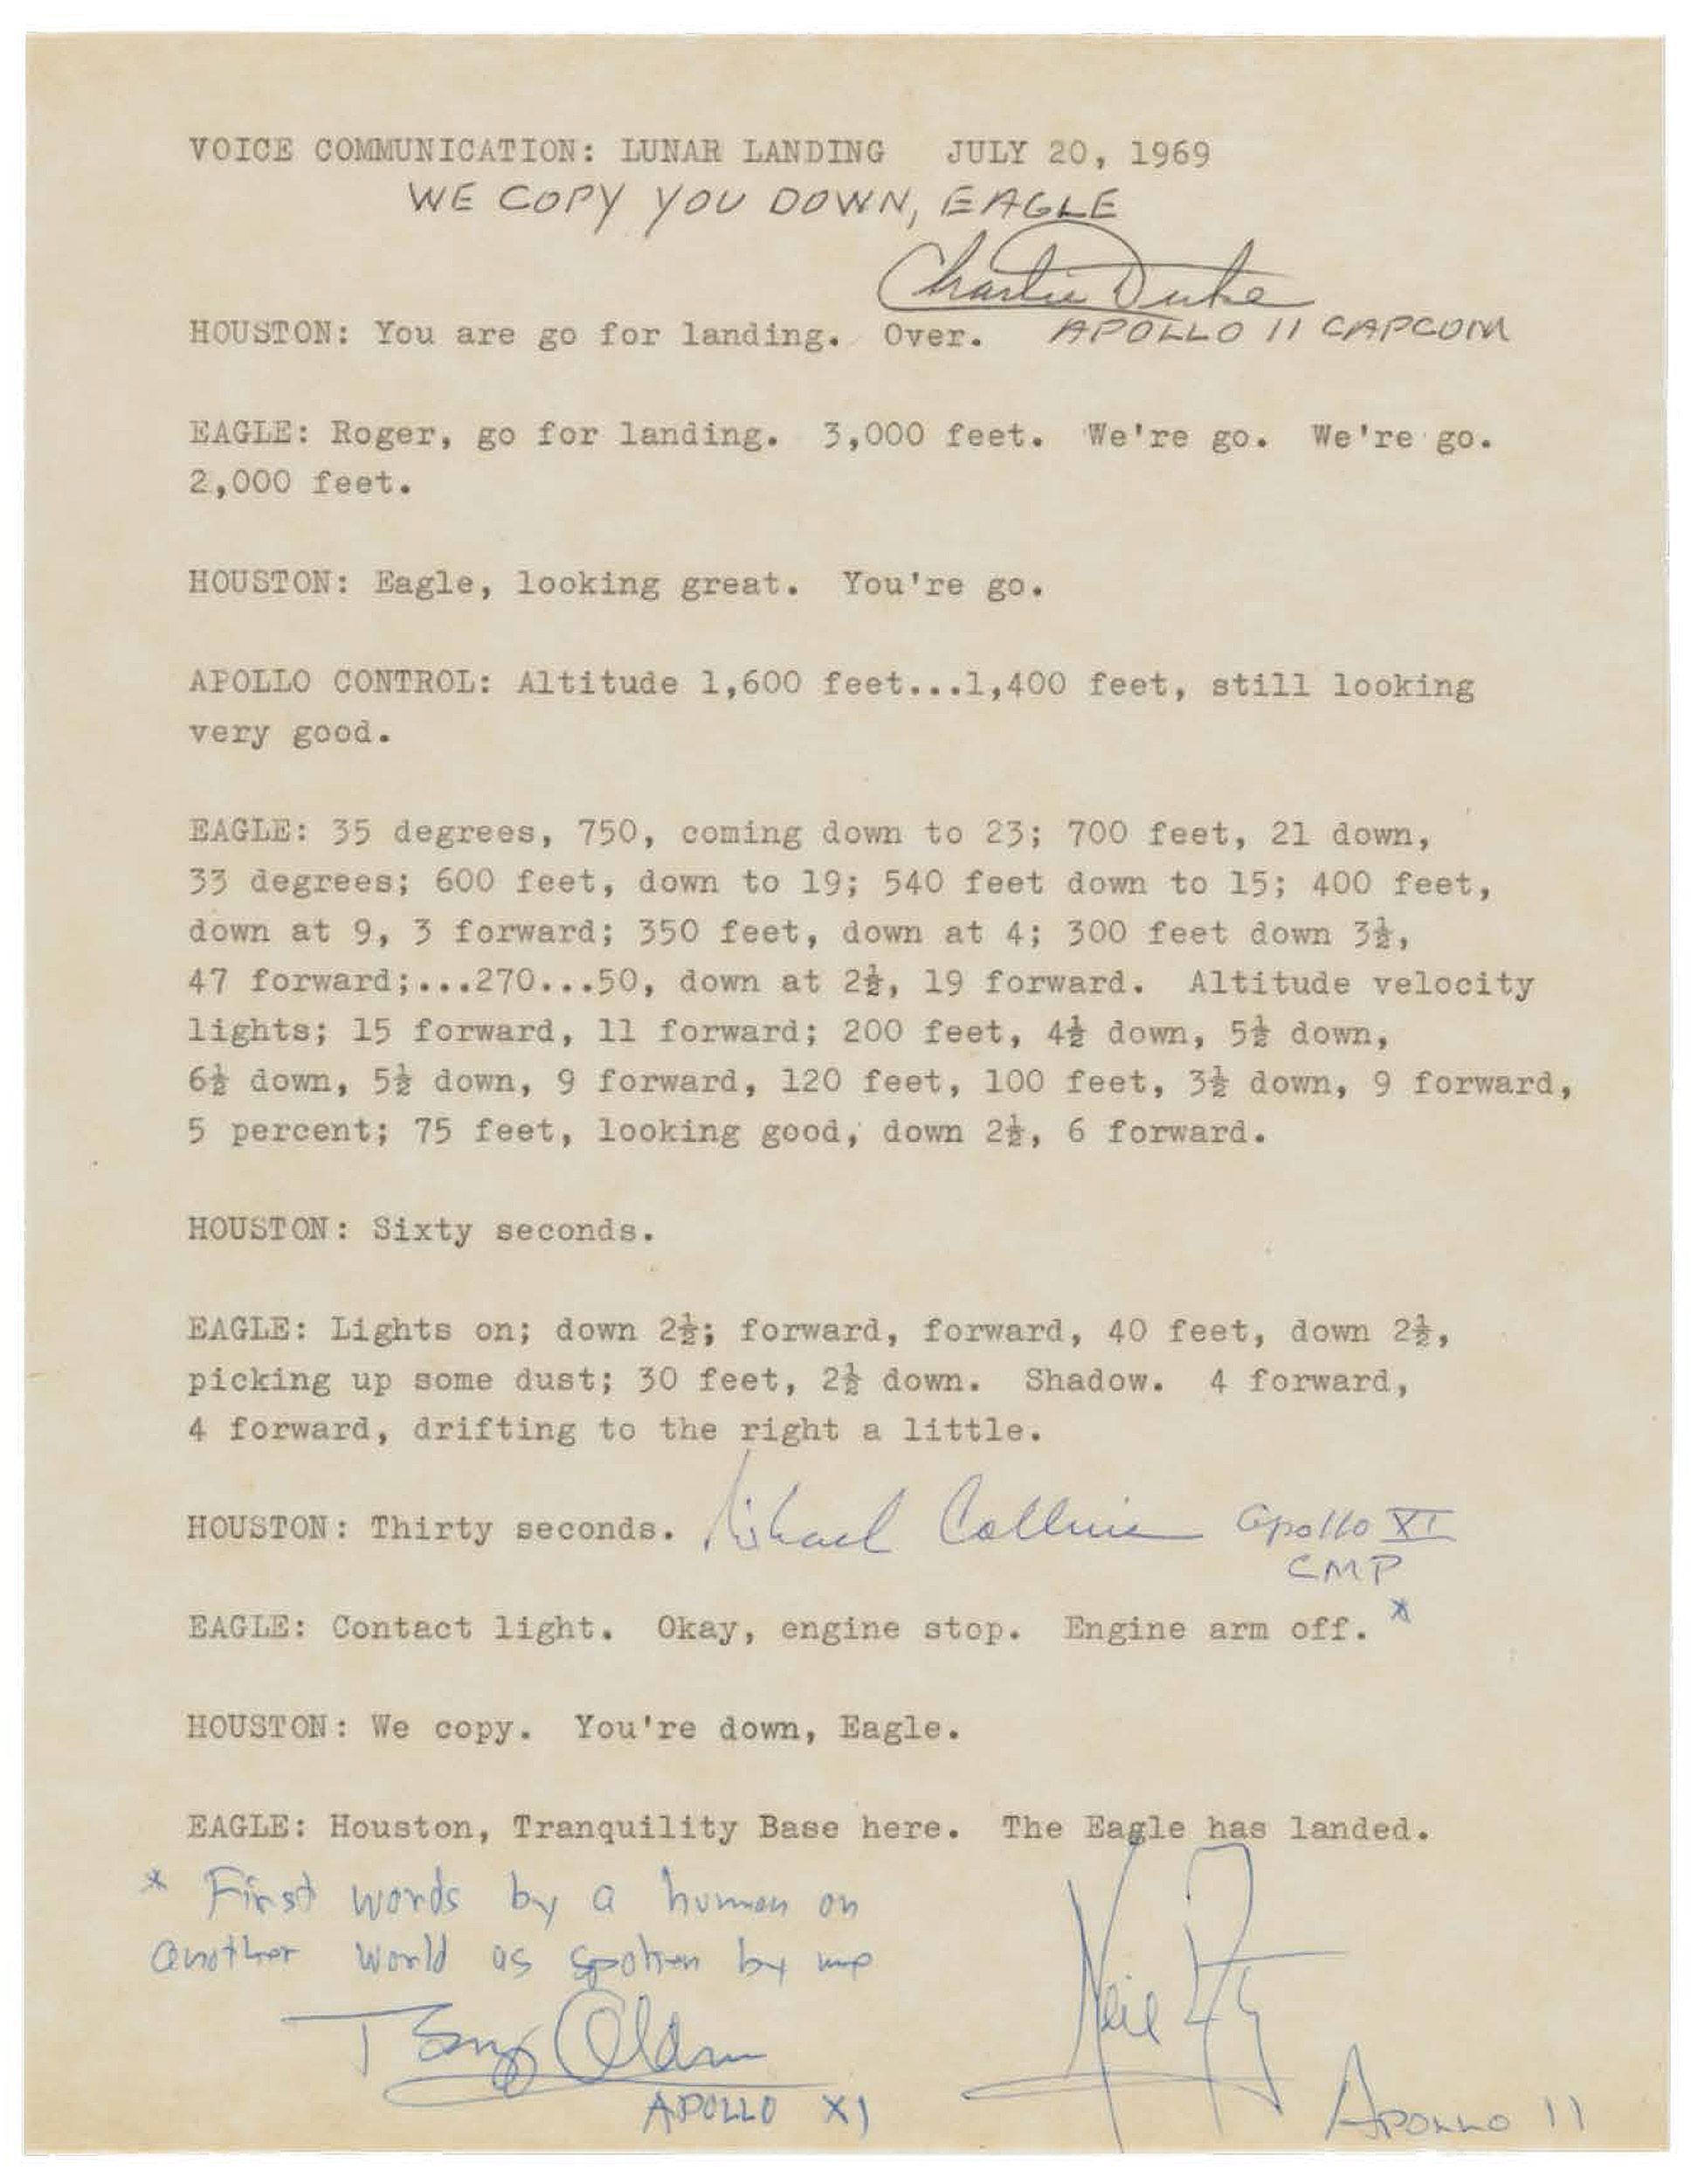 Transcript of Apollo 11 communications, including "The Eagle has landed."